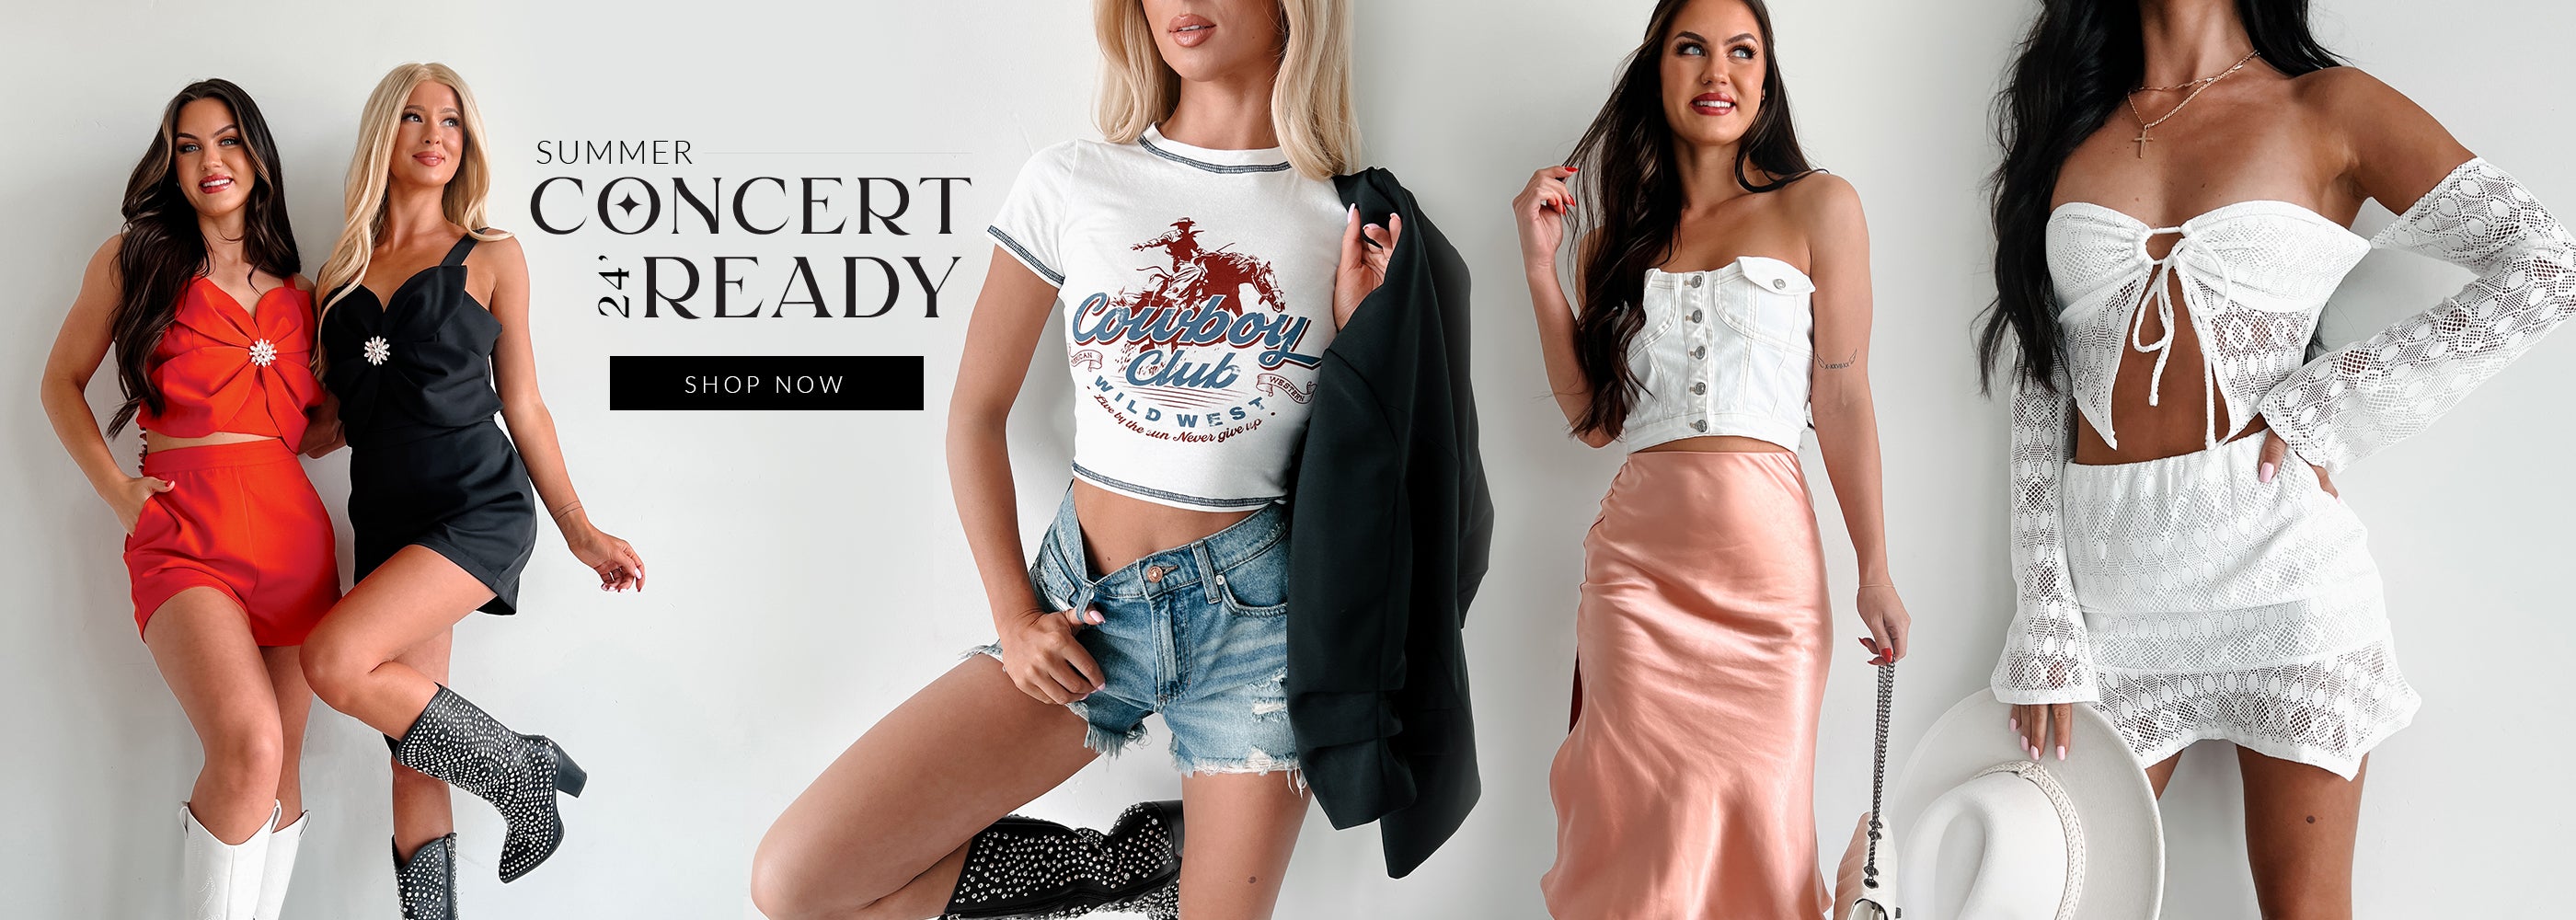 Collage of models wearing western and summer concert outfits. Headline says "Summer Concert Ready 24'" Call to action says "Shop Now" and links to the Summer Concert Outfits collection.